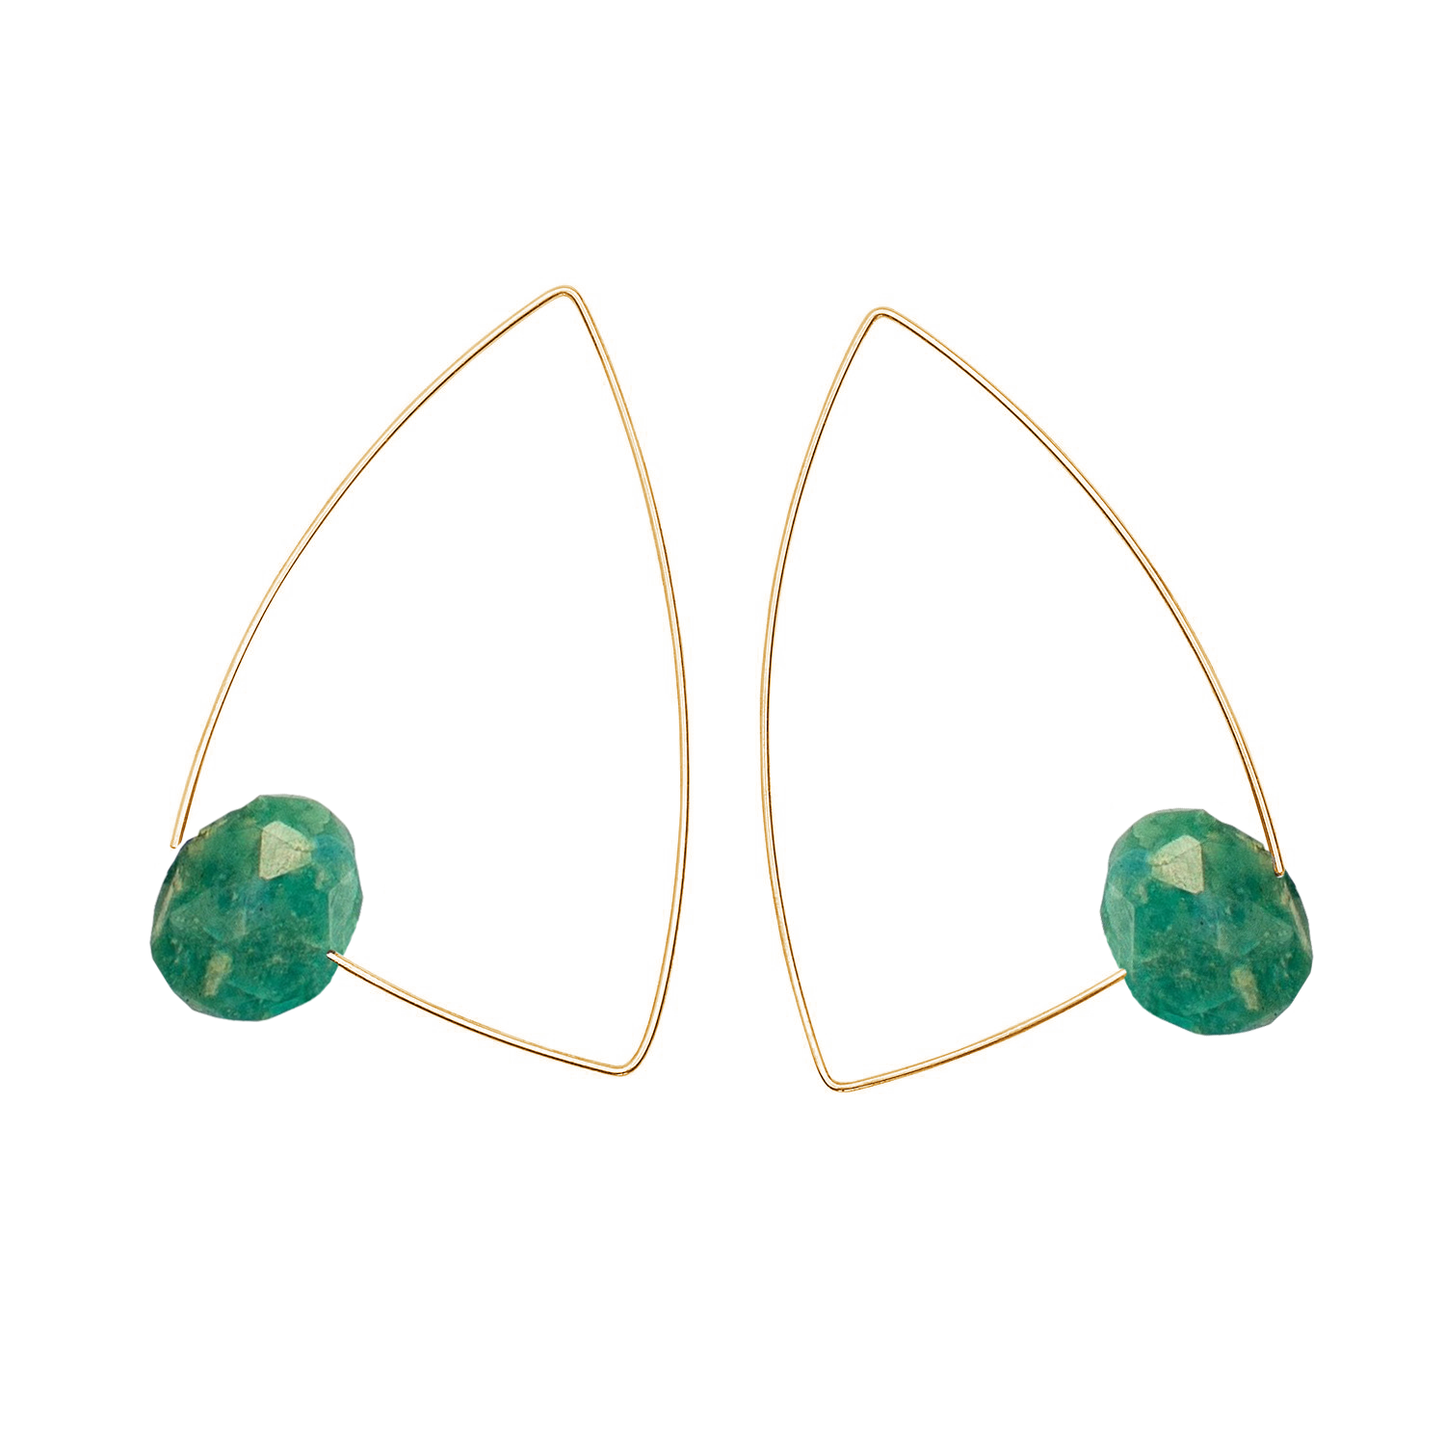 Large Triangle Earrings with hand-cut precious Gemstones